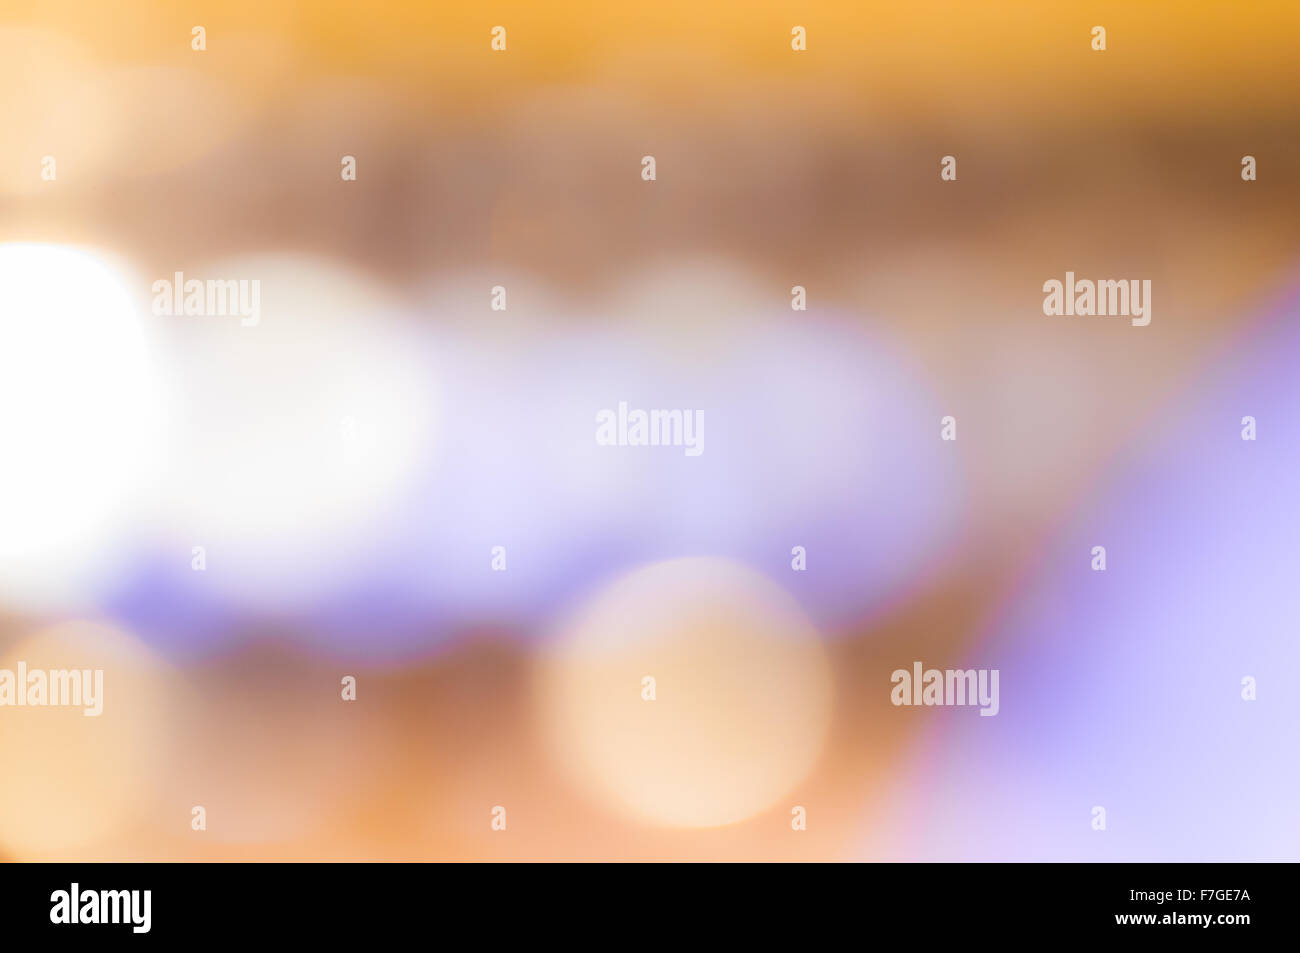 background of blurred yellow and purple lights Stock Photo